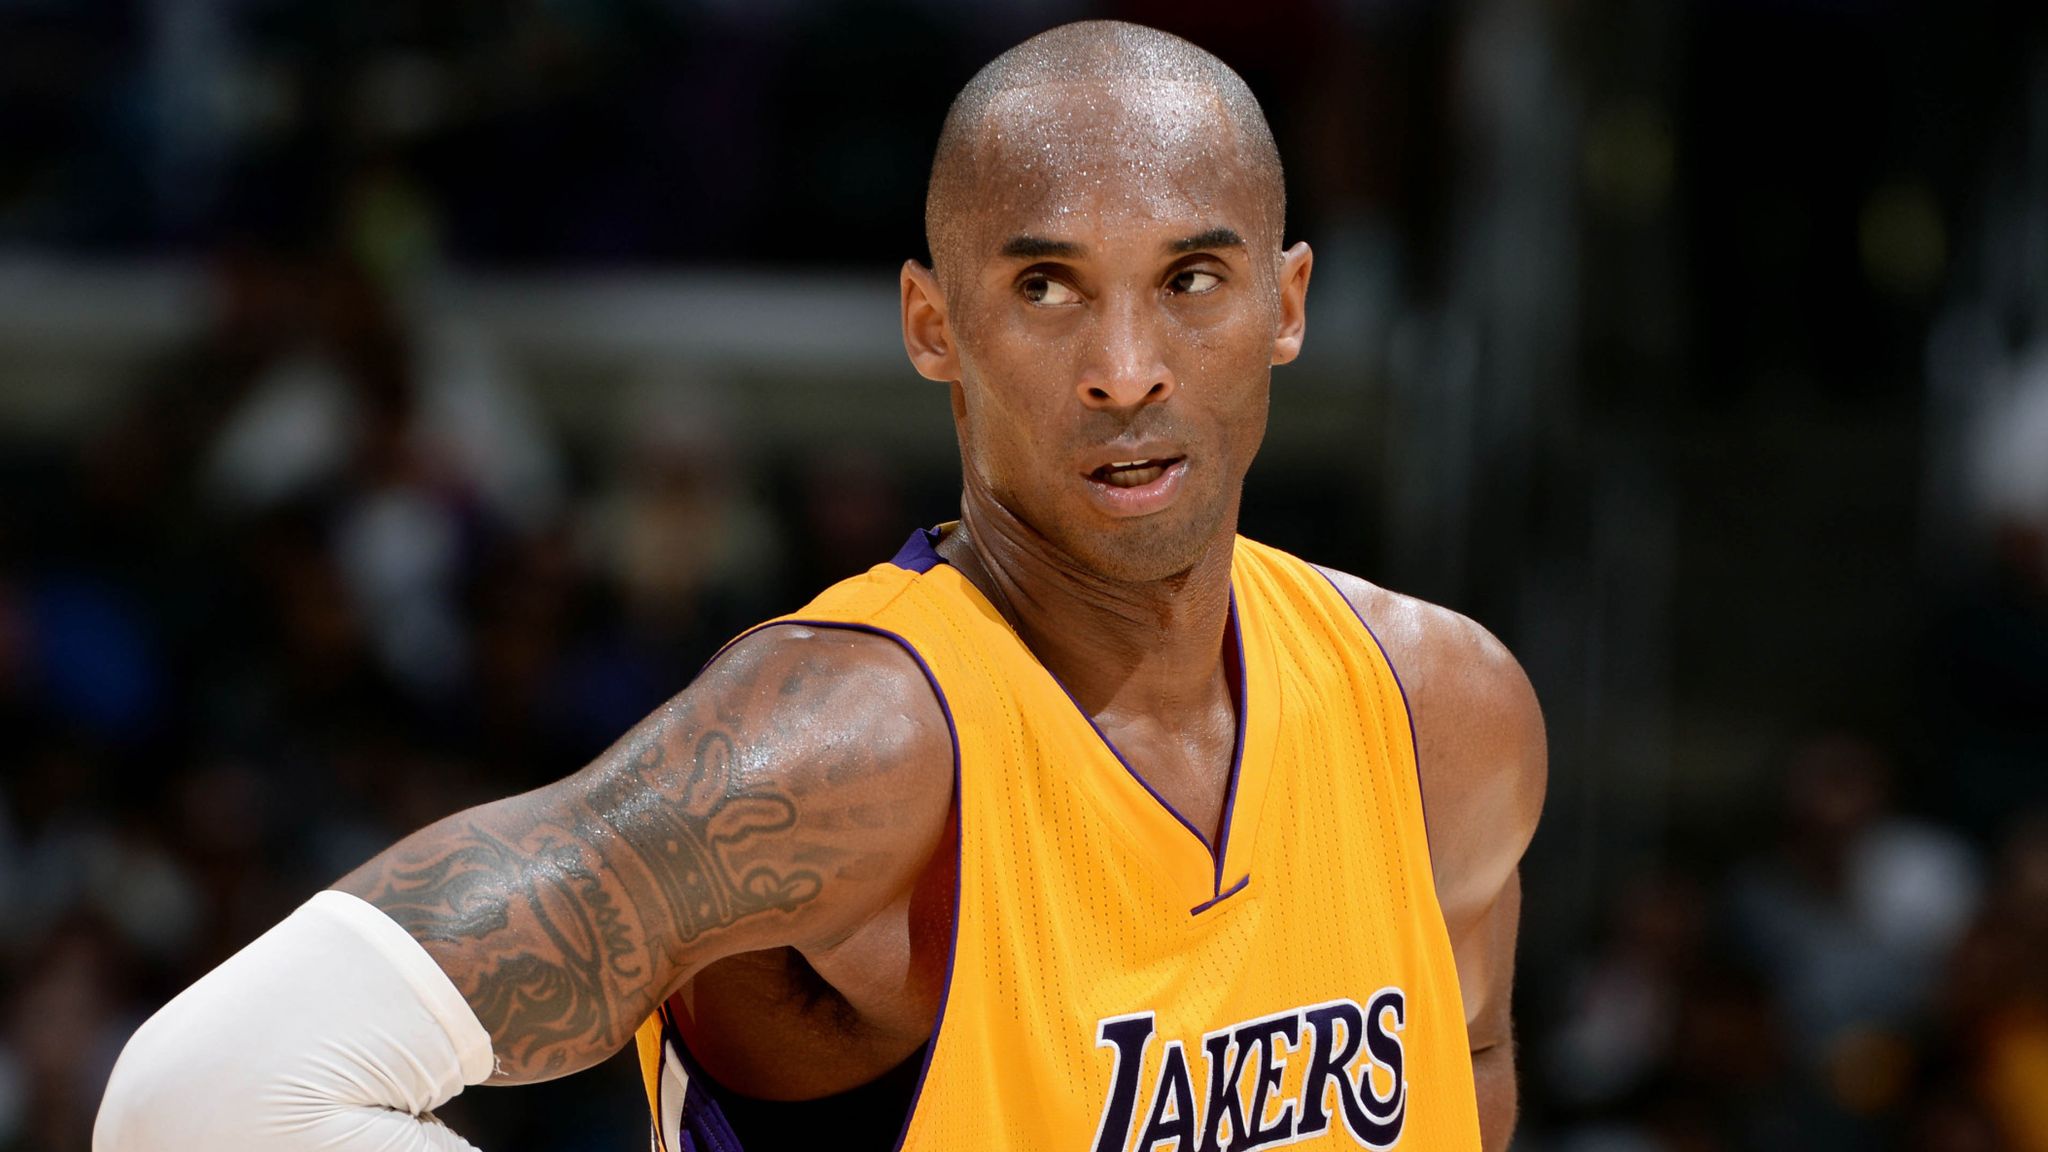 Where Would Kobe Bryant Have Played If He Went to College?